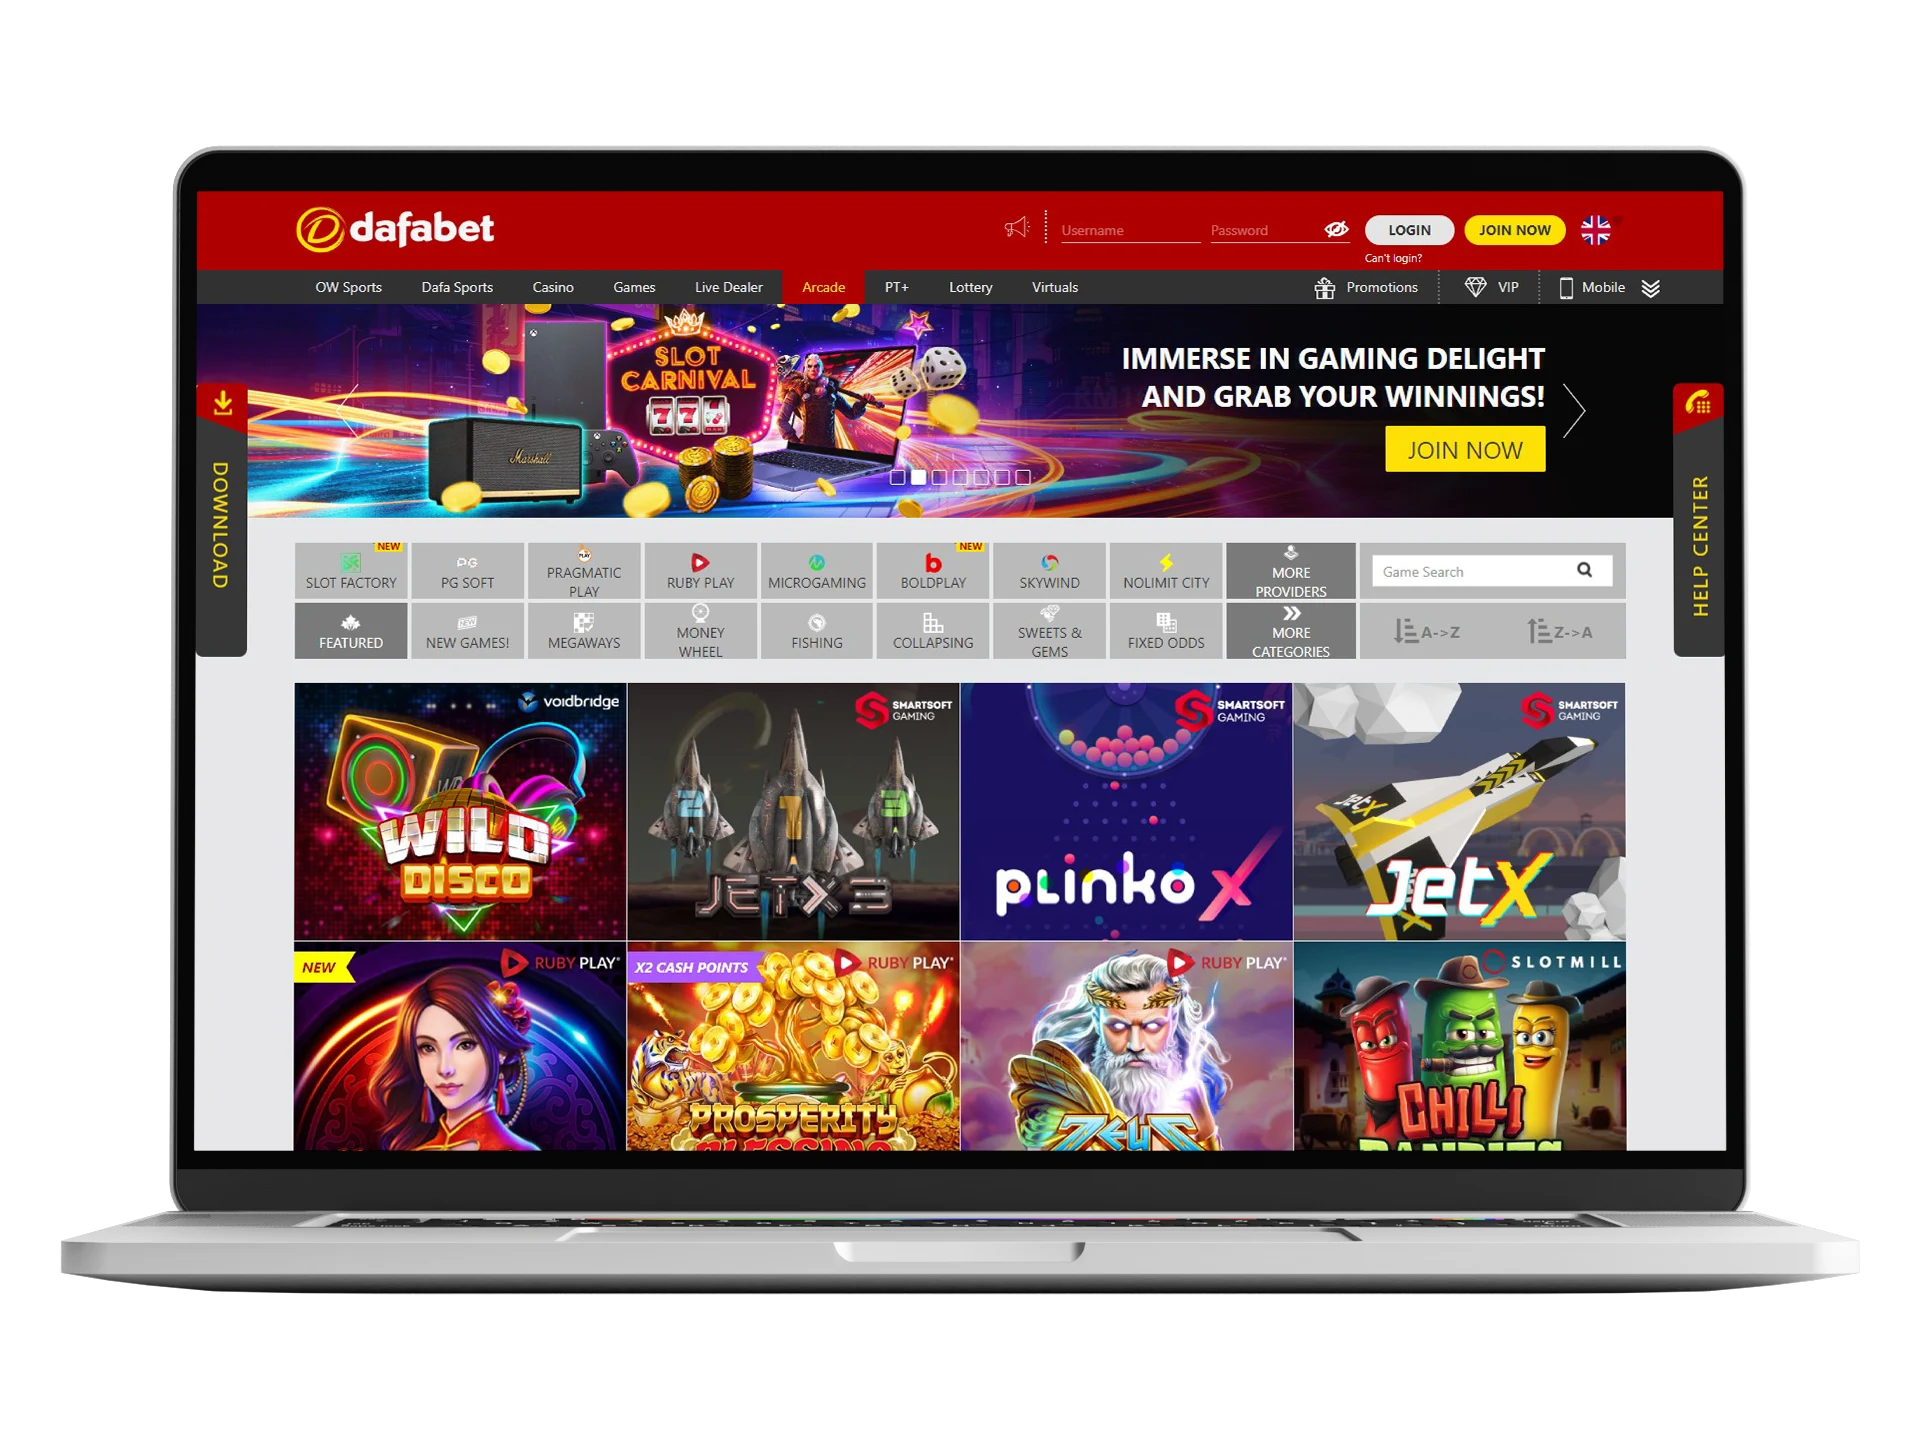 Dafabet offers sports betting and provides various sports events, as well as casino gambling.